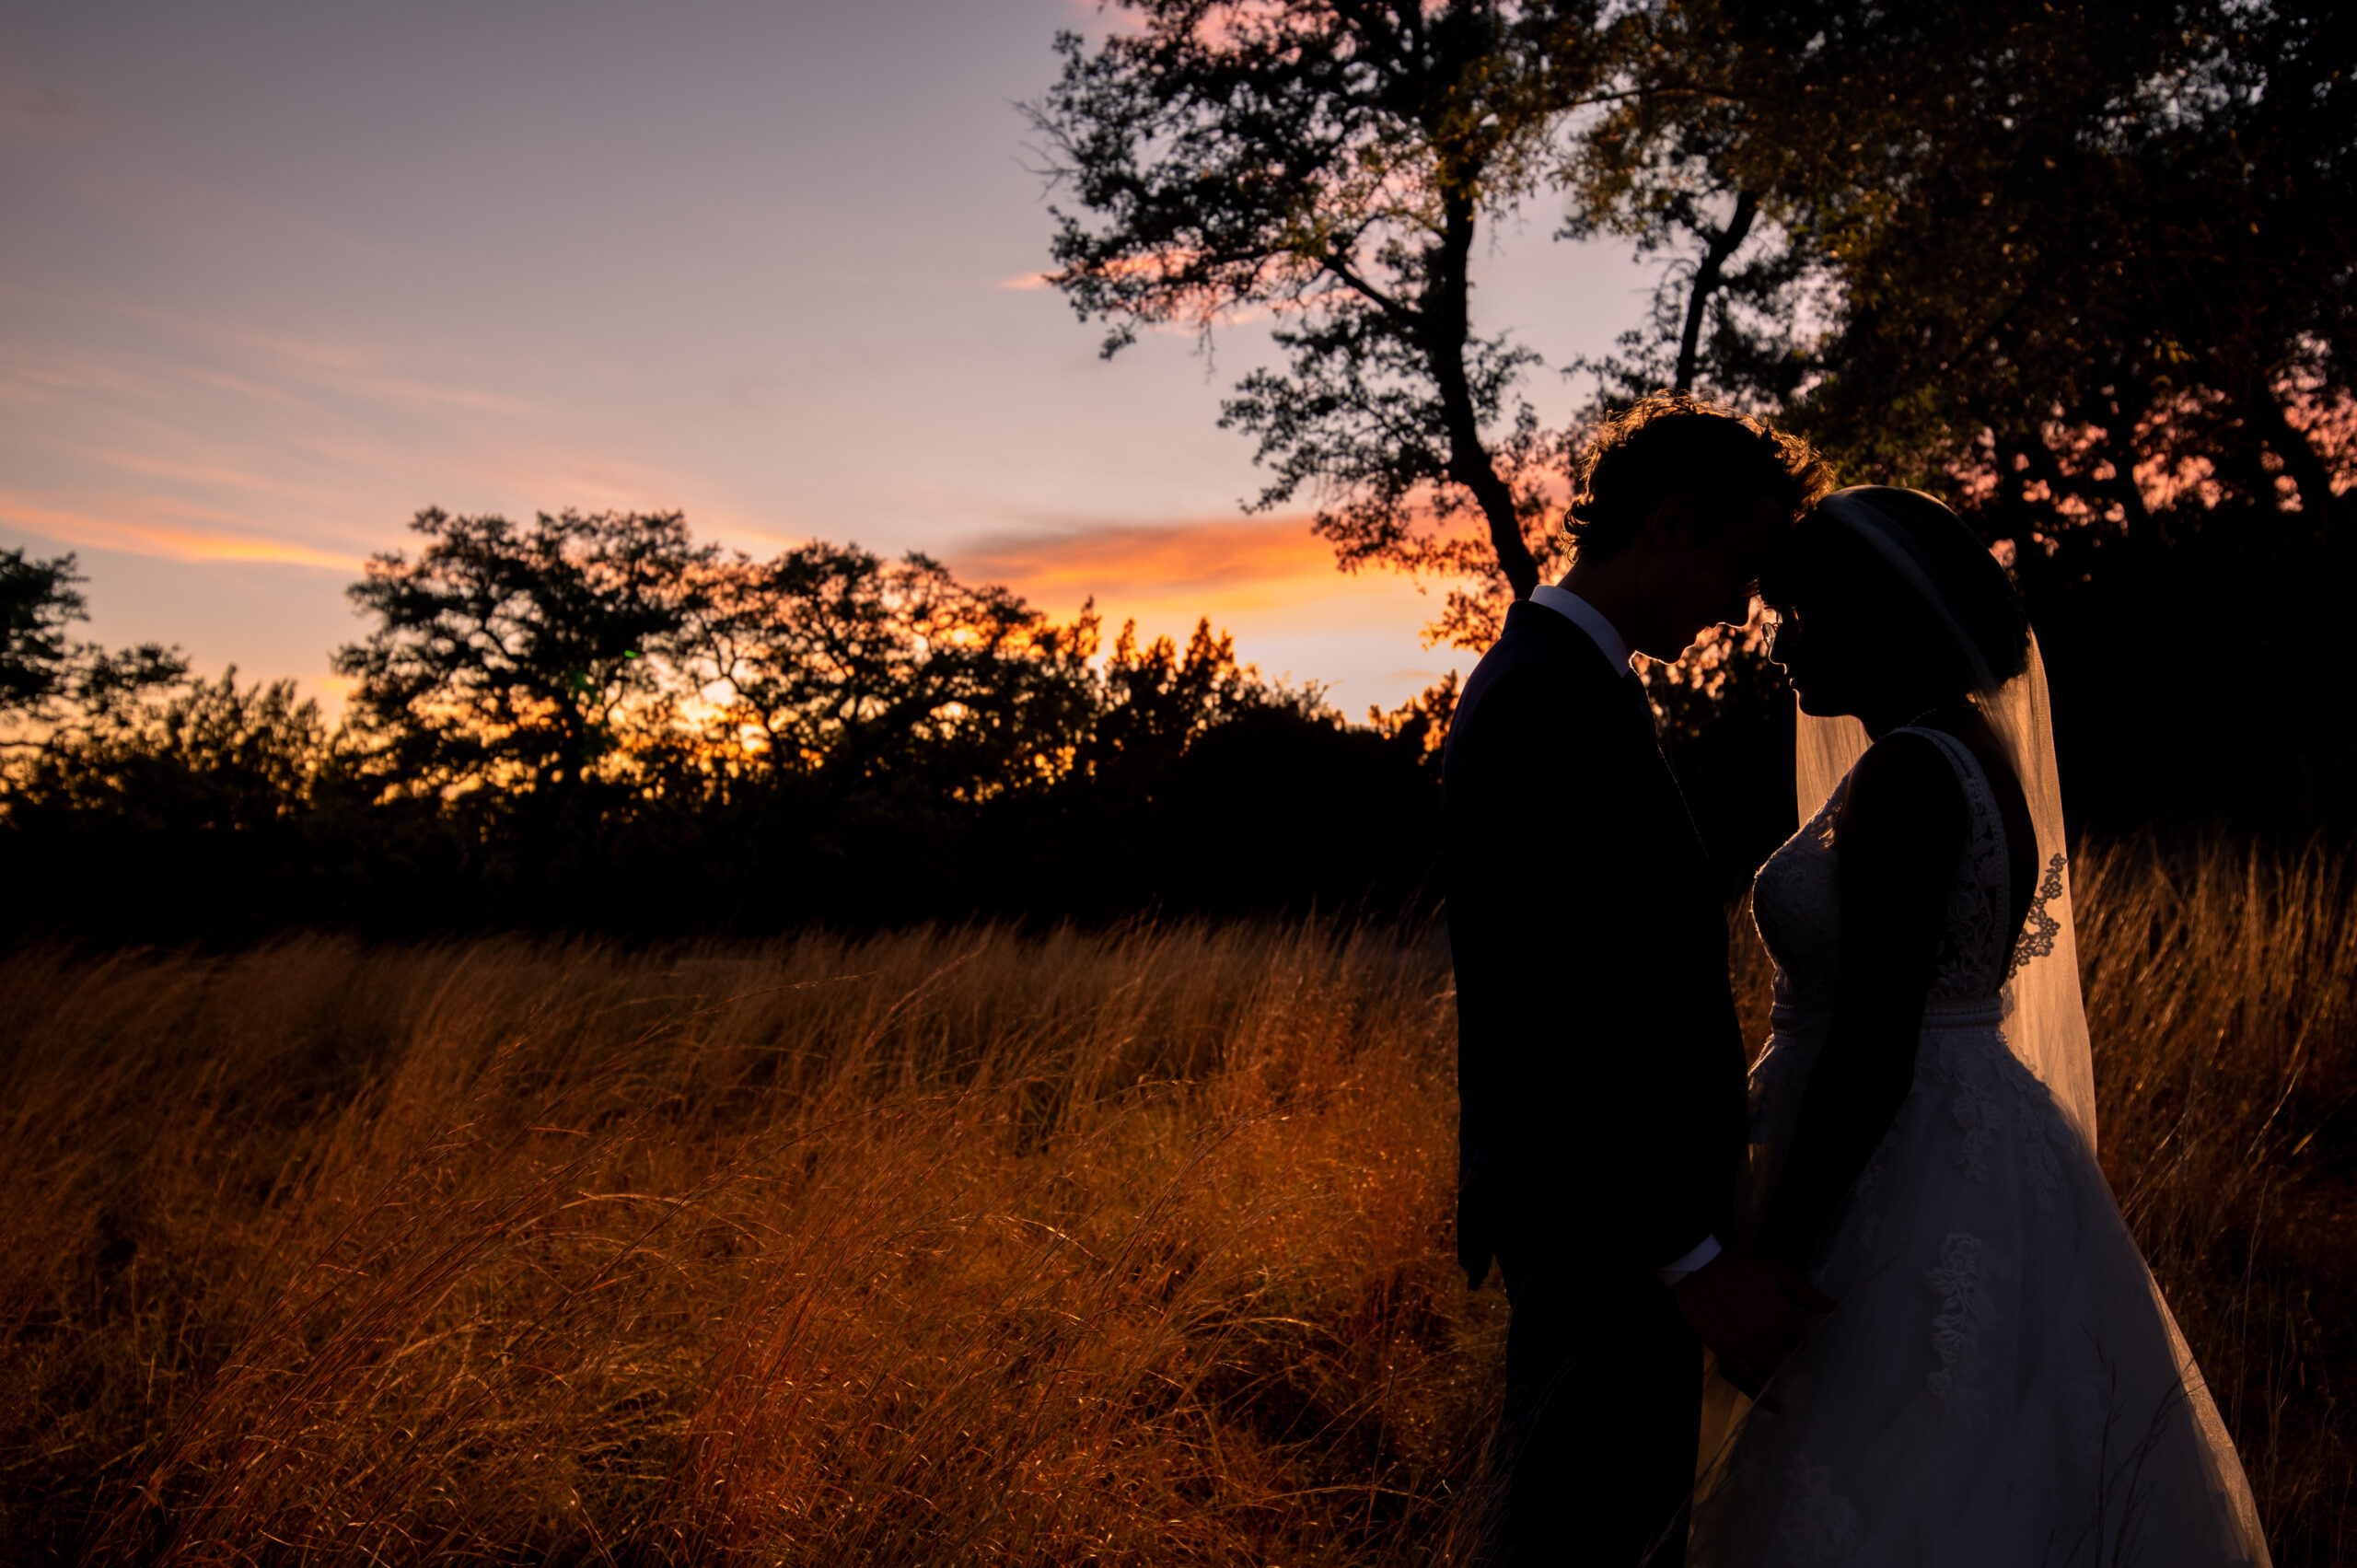 Bride and groom sharing an intimate moment at sunset in Dripping Springs, TX, standing in tall grass next to an oak tree.